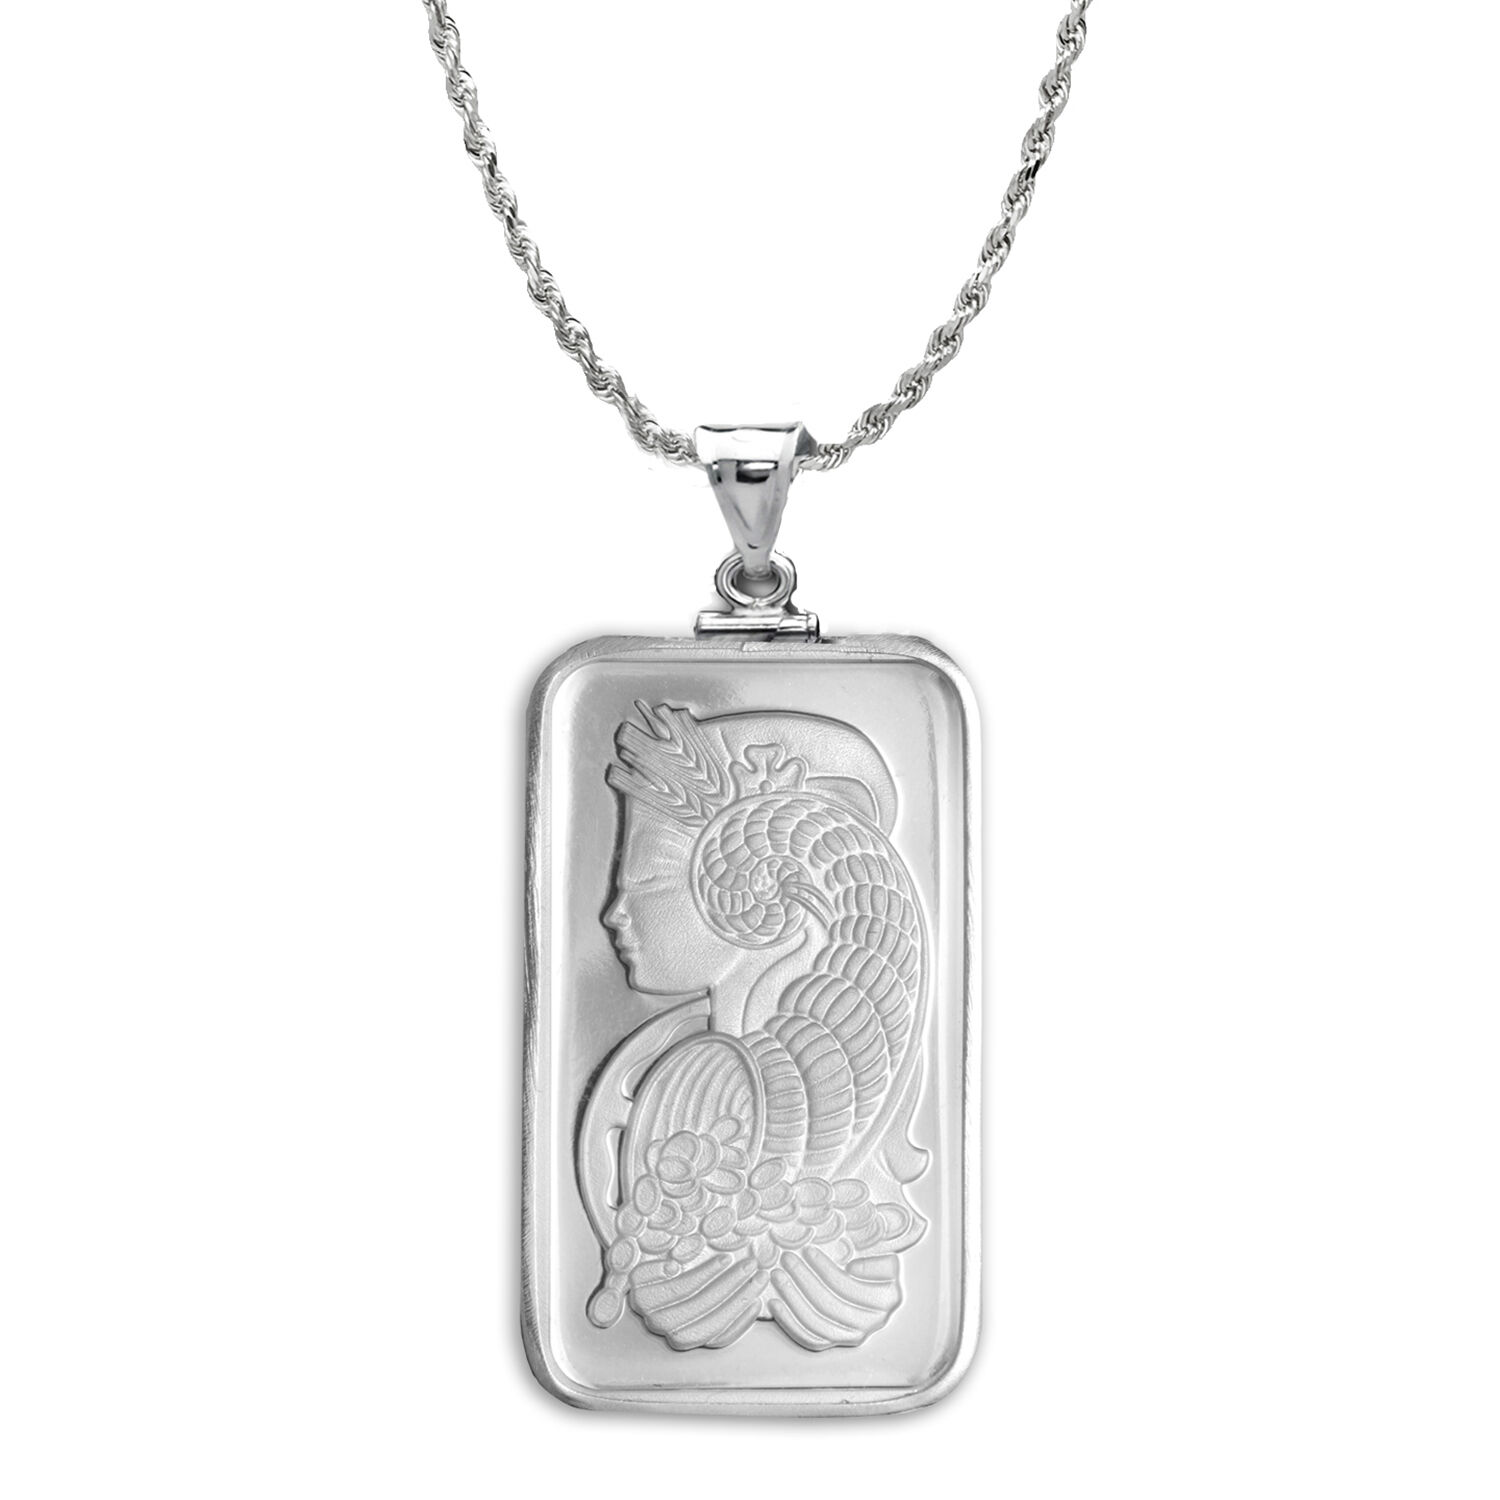 20 gram Silver - PAMP Suisse Fortuna Pendant (w/Chain) - SKU #86993 Pamp Suisse 86993